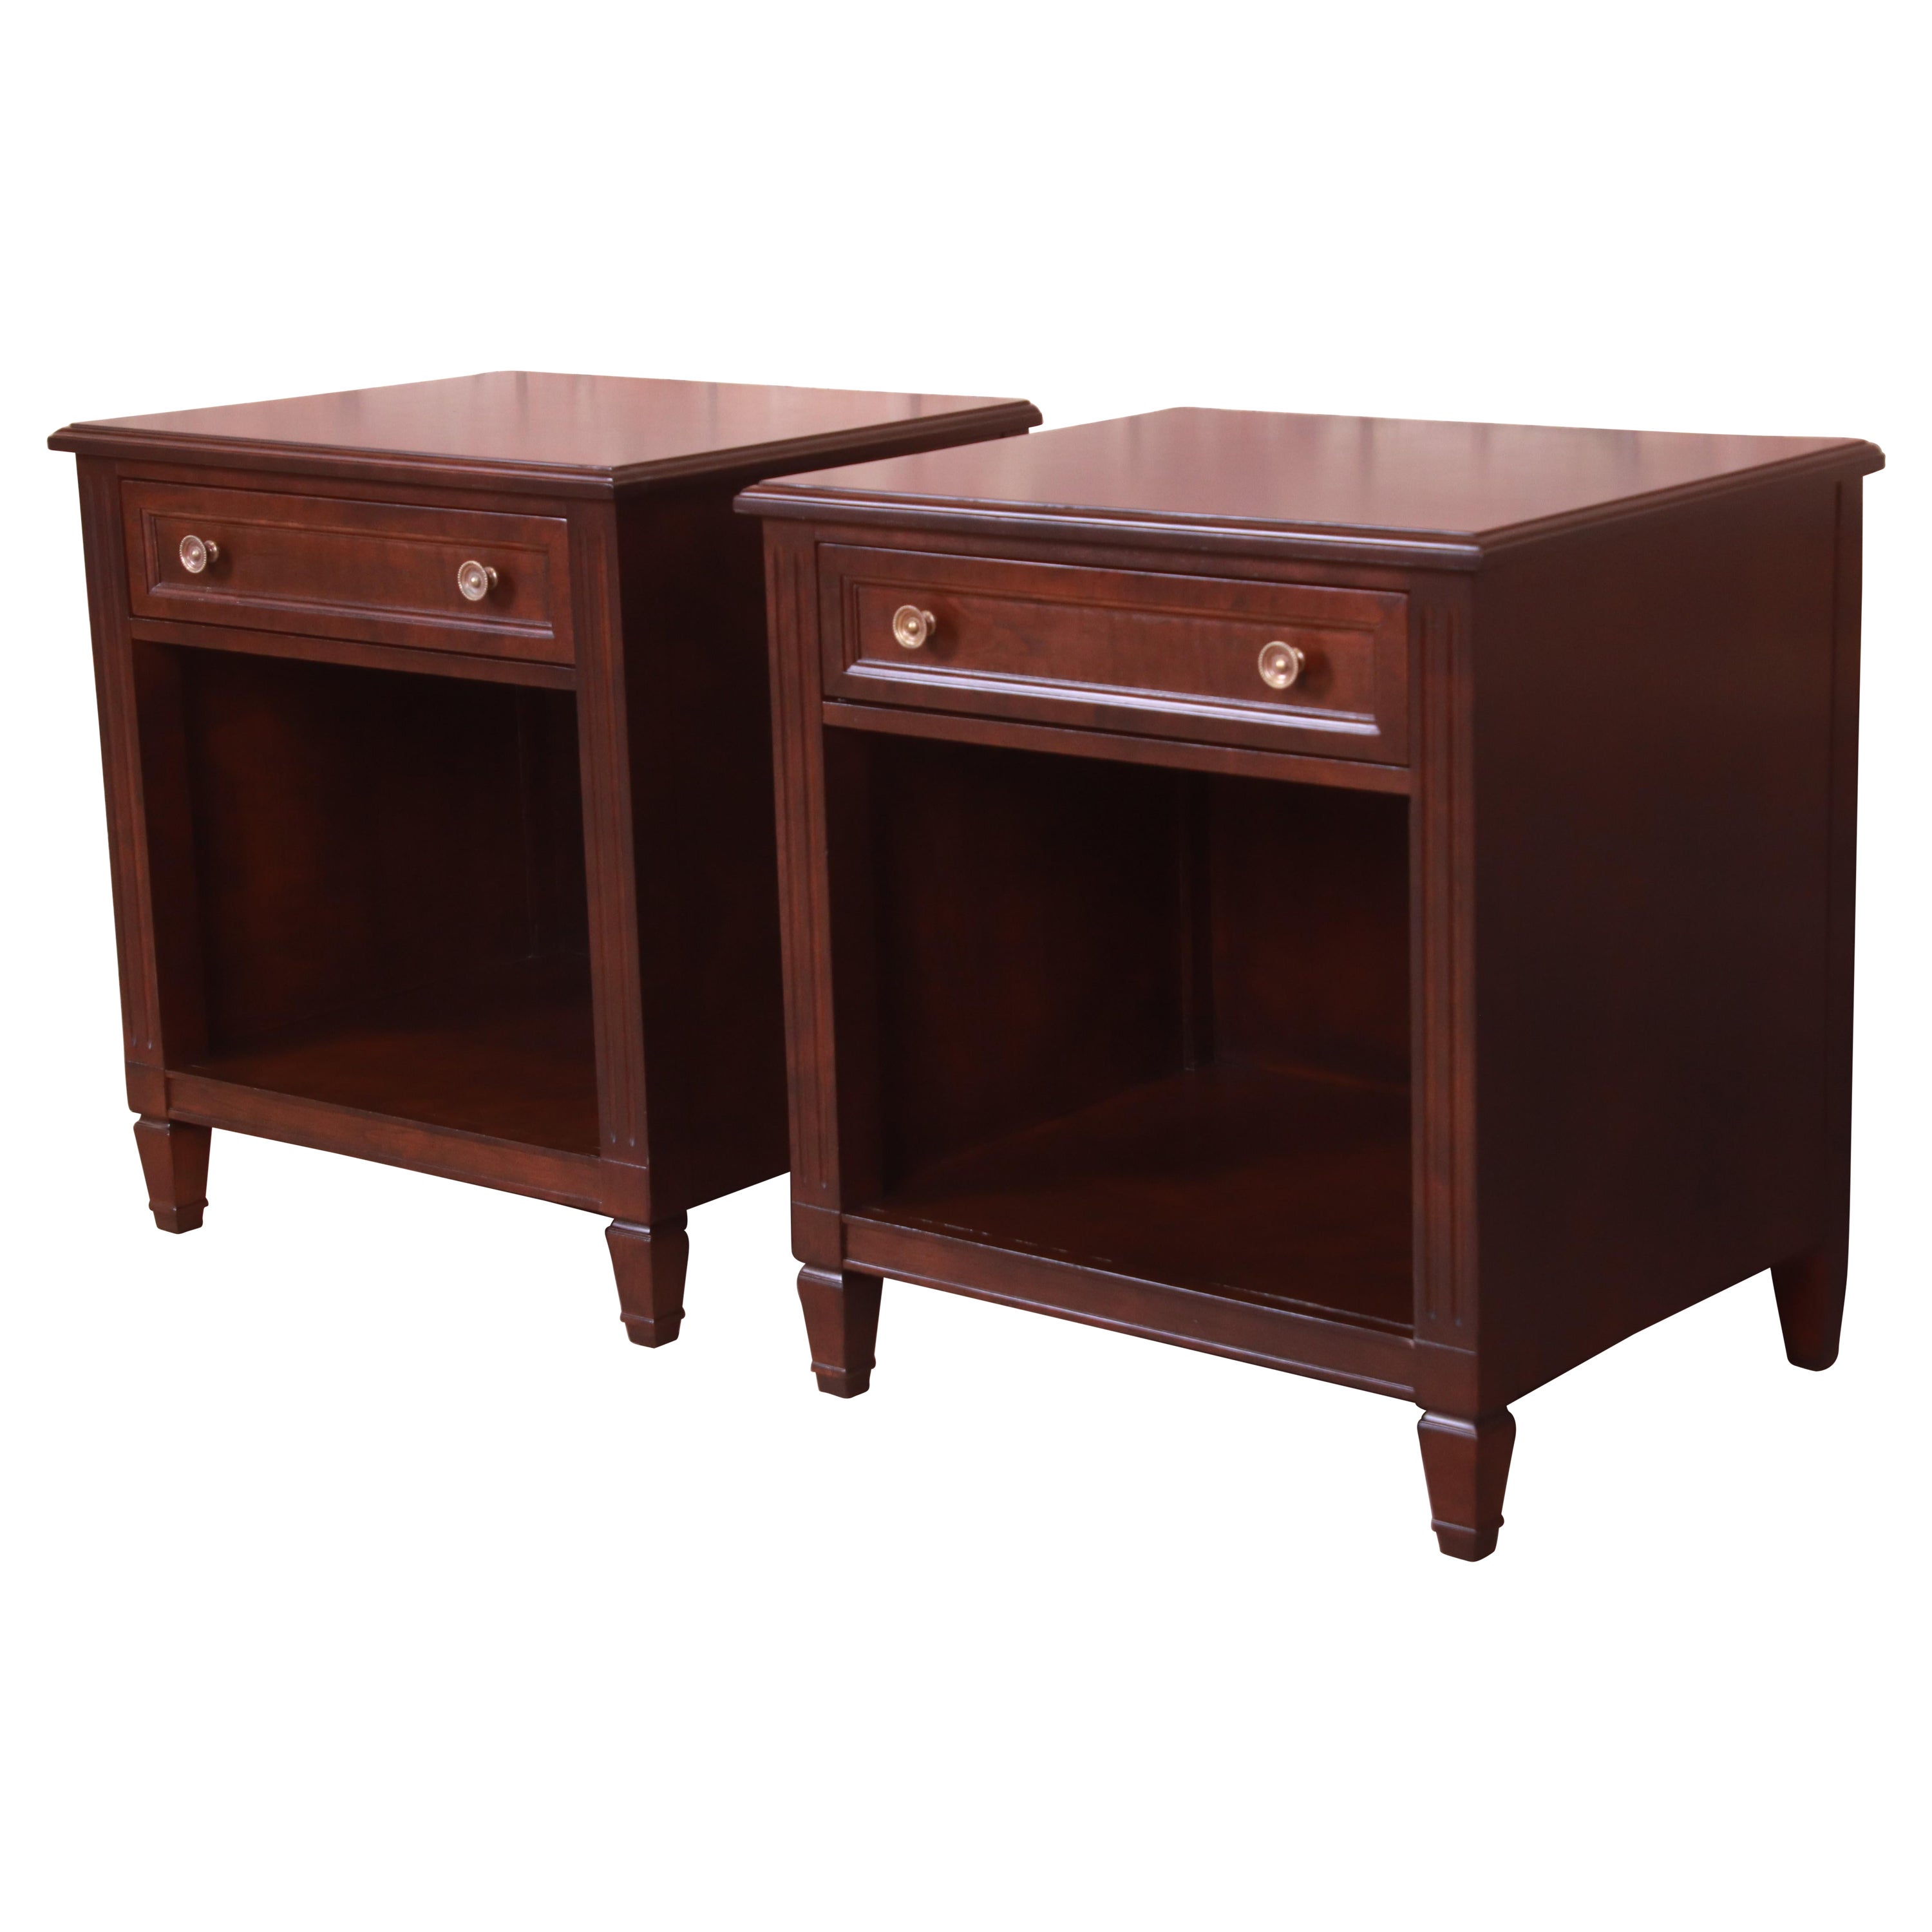 Kindel Furniture French Regency Louis XVI Cherry Wood Nightstands, Refinished